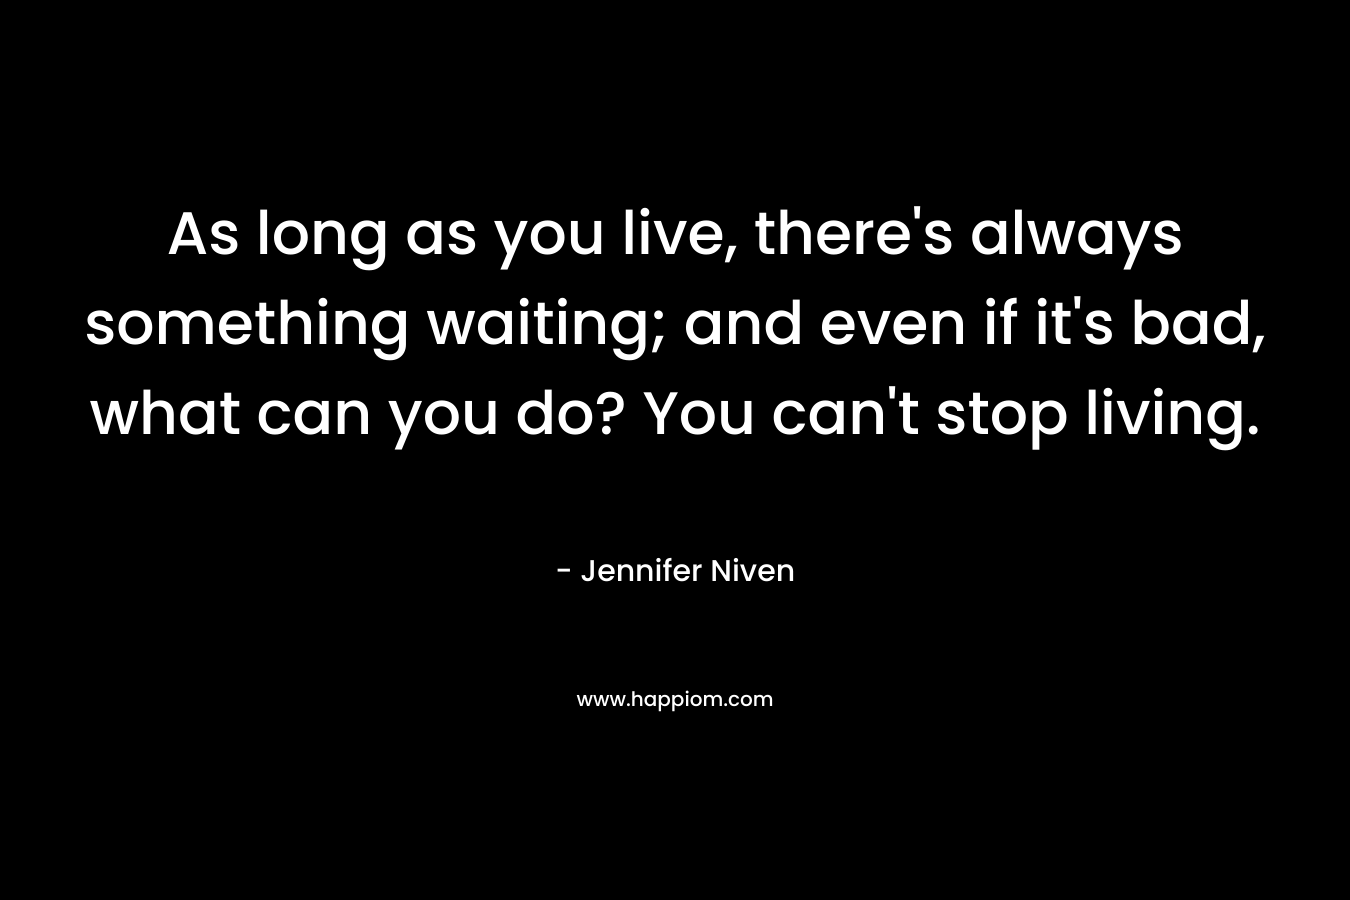 As long as you live, there’s always something waiting; and even if it’s bad, what can you do? You can’t stop living. – Jennifer Niven